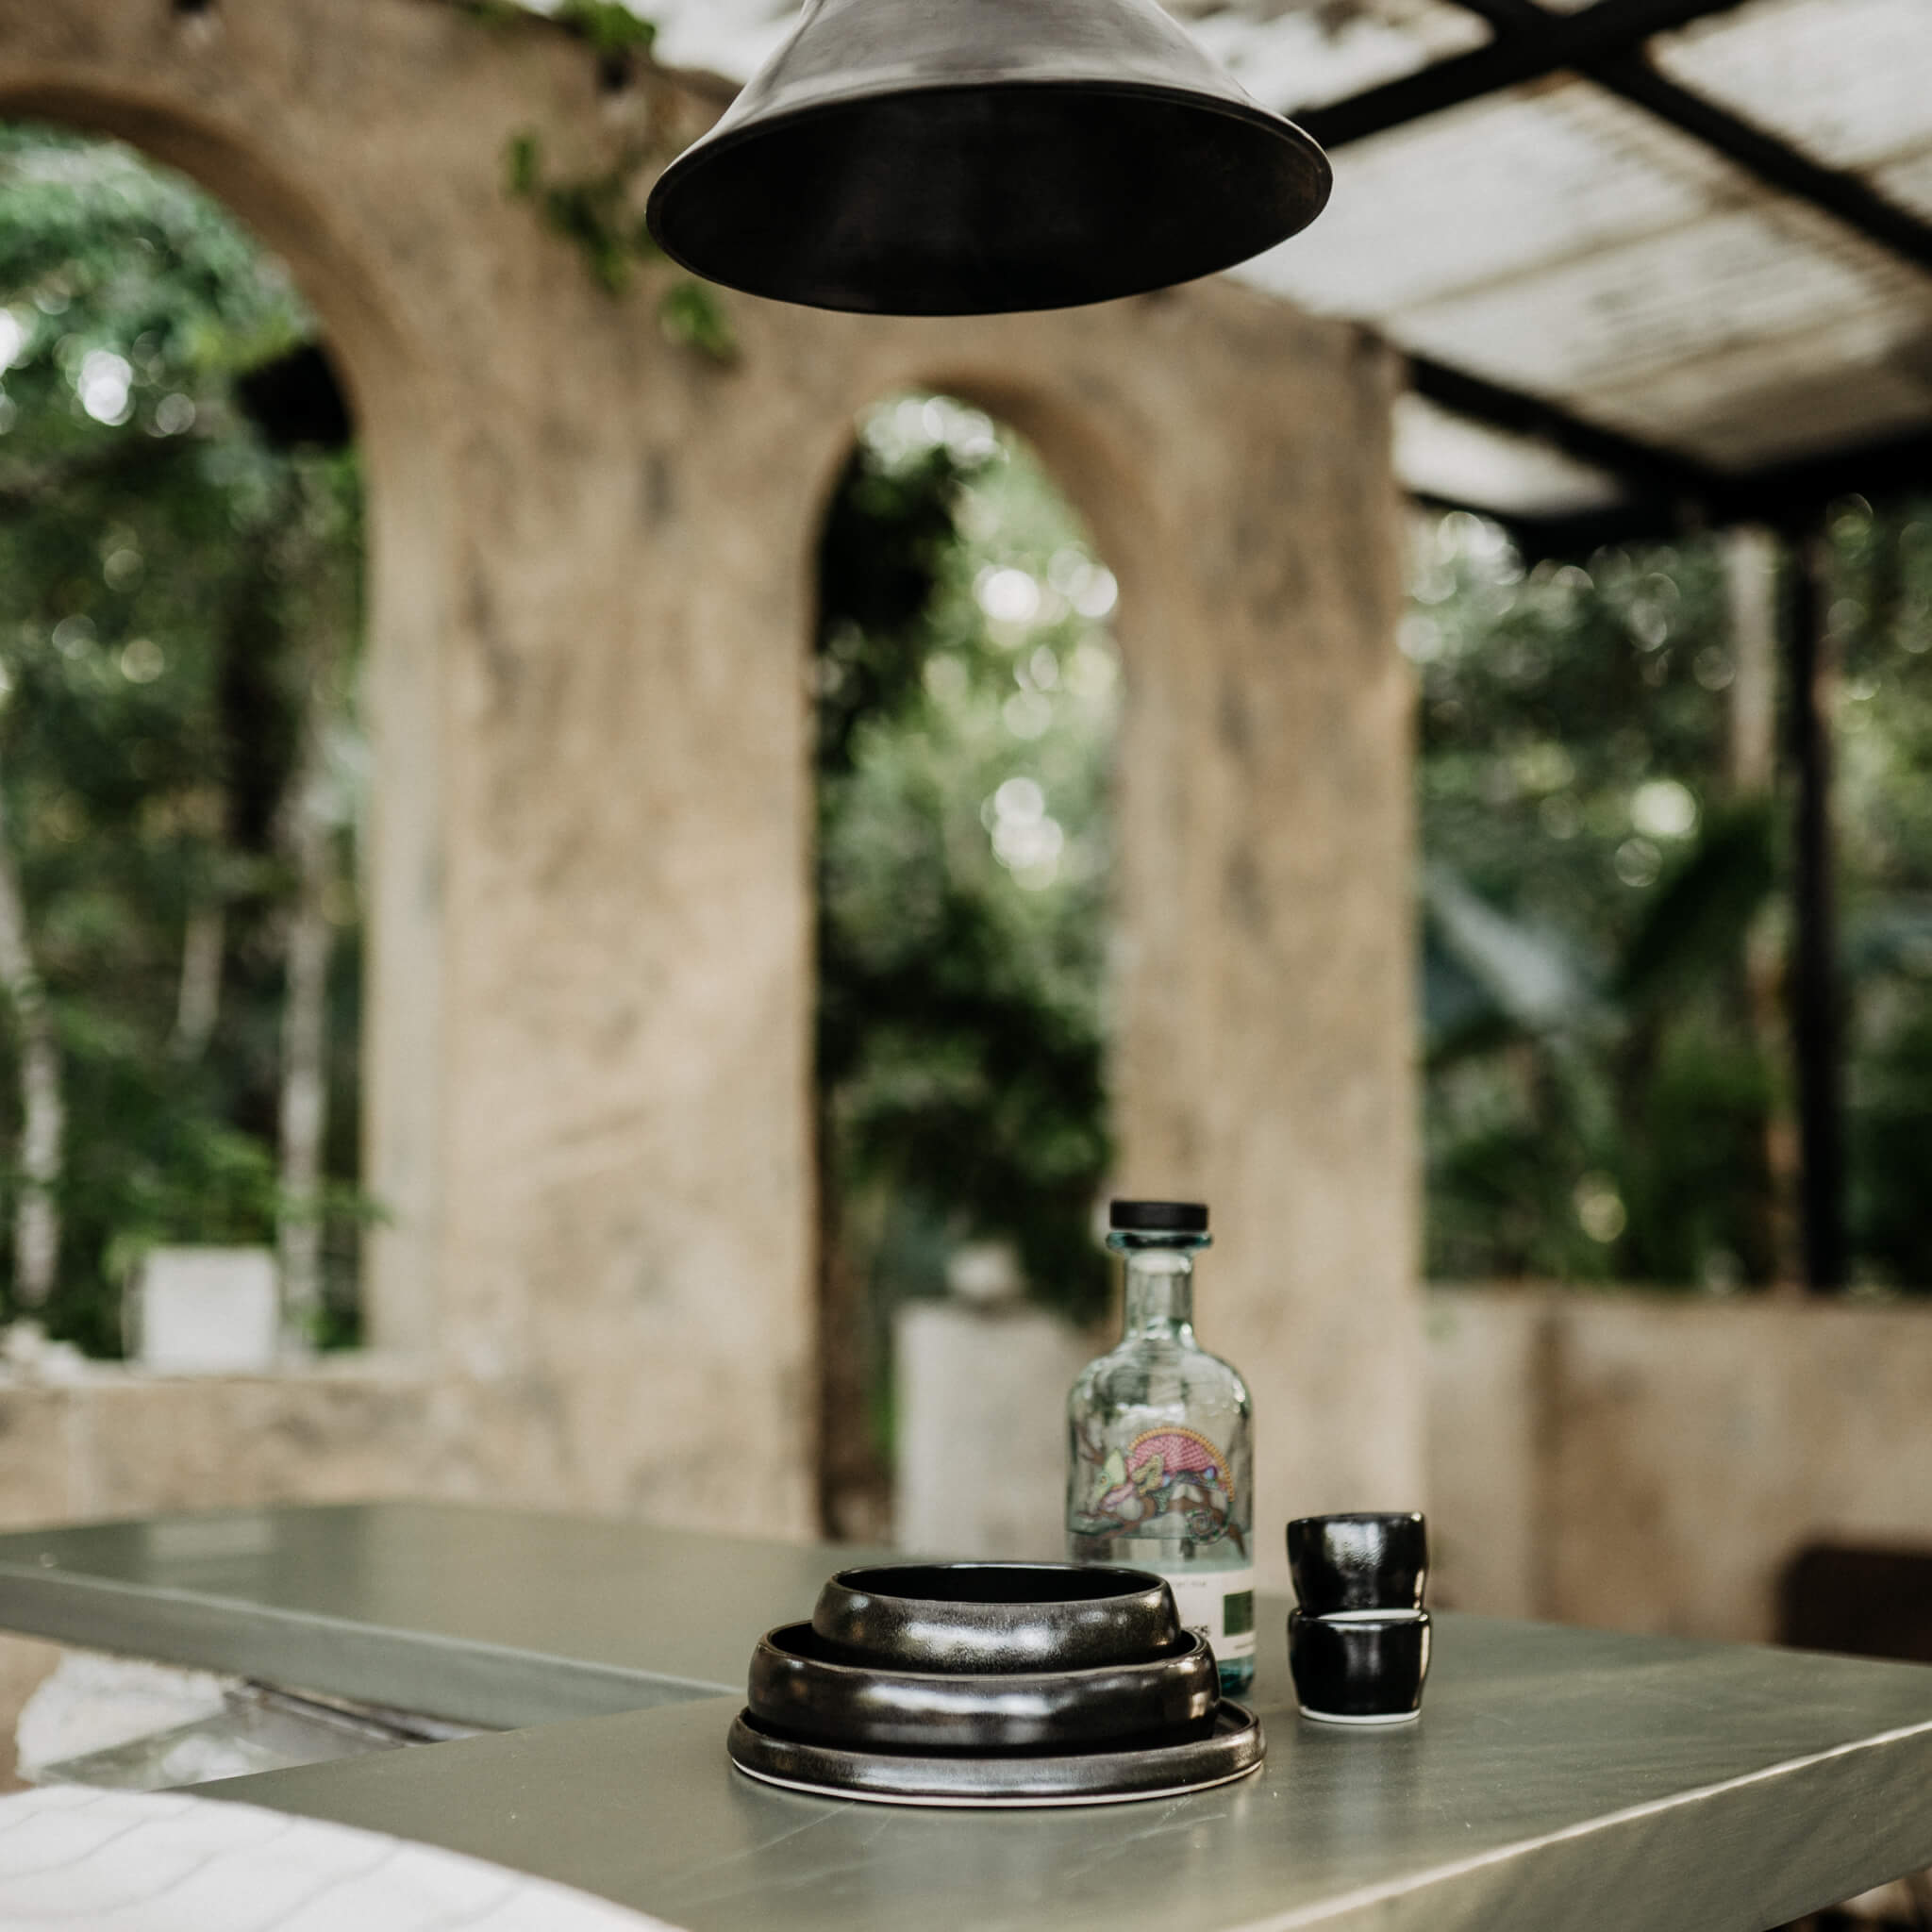 Black ceramic dishes on an outdoor counter in Mexico.